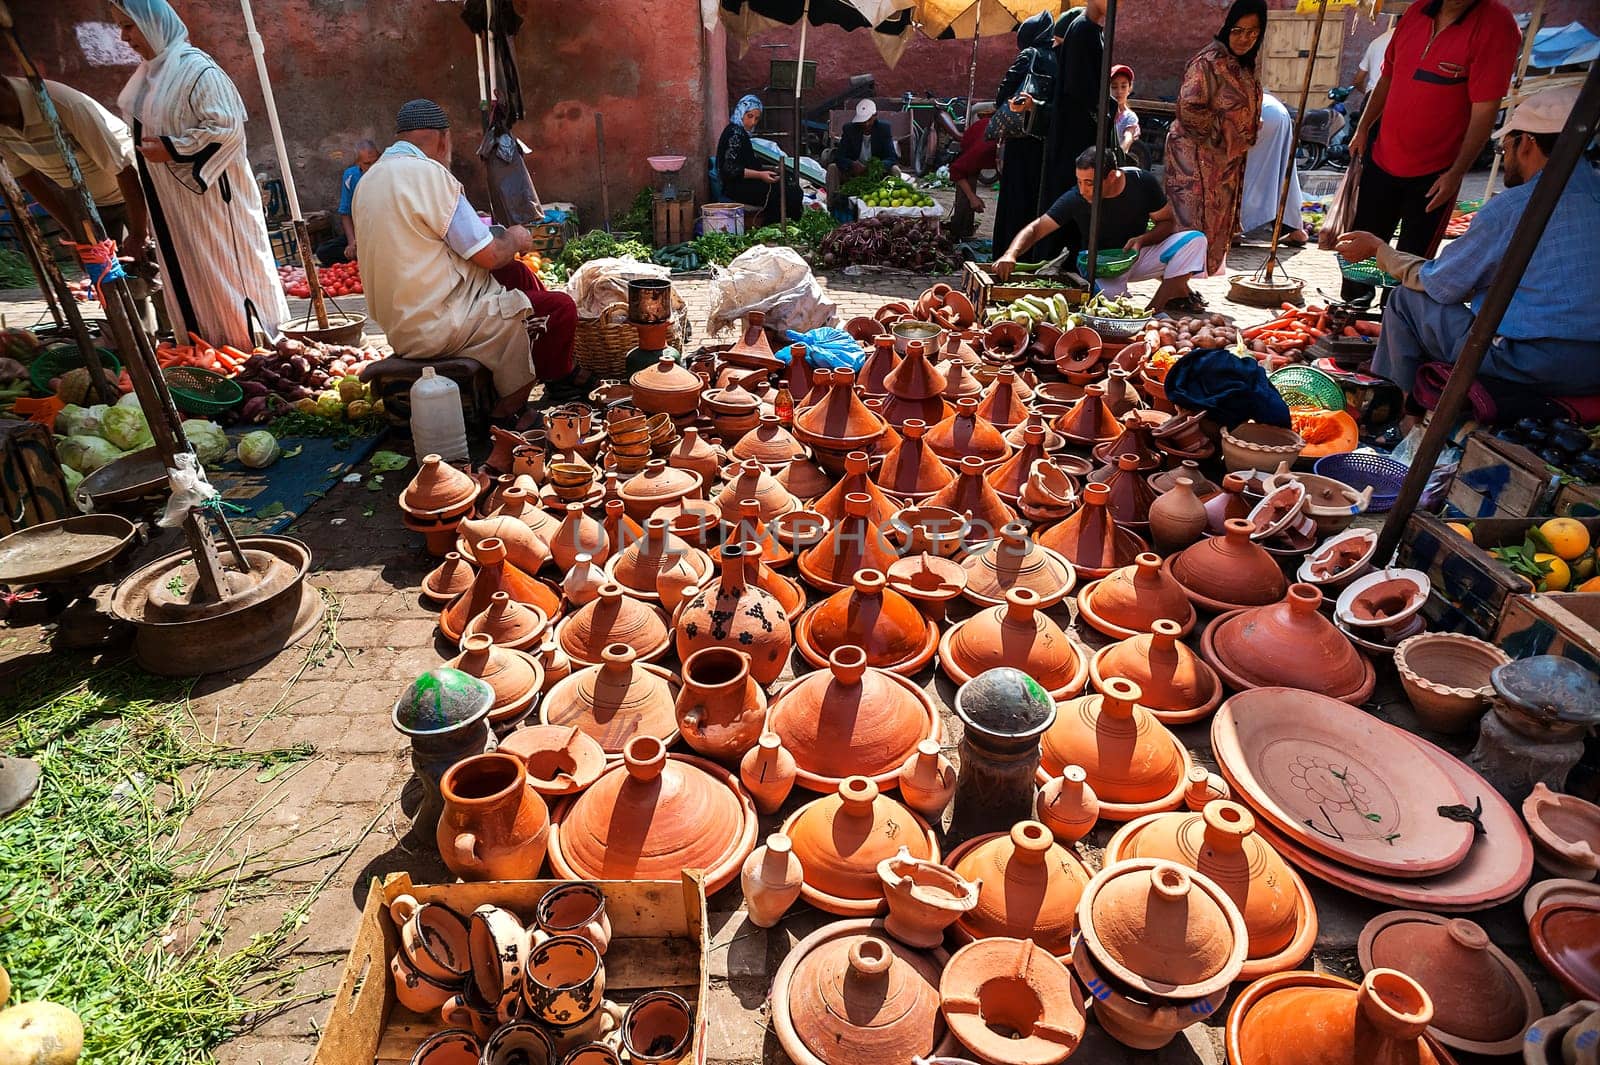 Moroccan tajines ceramic cookware at the market of Marrakesh, Morocco by Giamplume